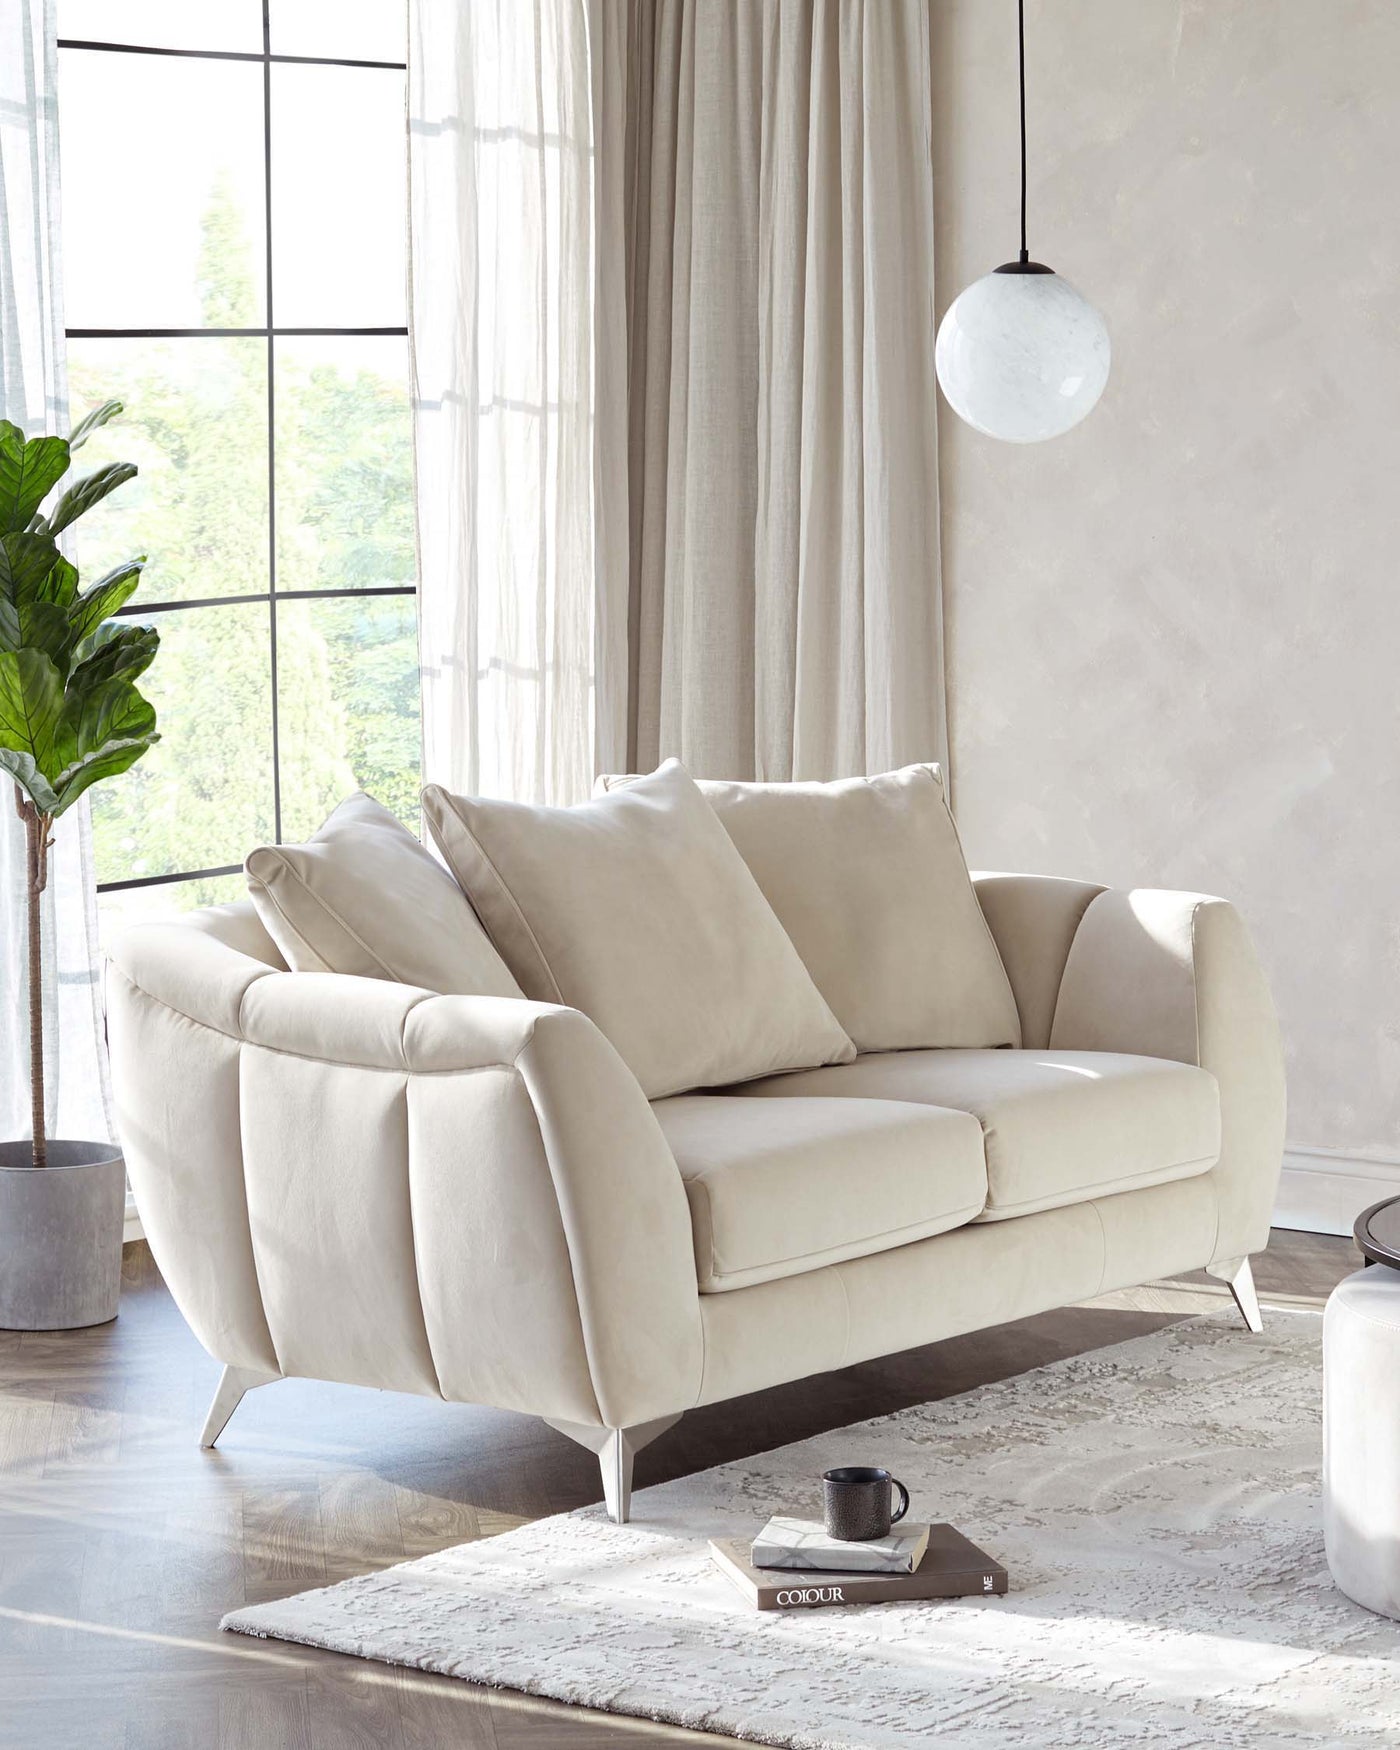 Modern two-seater sofa with a sleek design, featuring a smooth cream fabric upholstery and curved armrests. Stands on slender, angled metallic legs. A cosy, contemporary piece suitable for a chic interior decor.